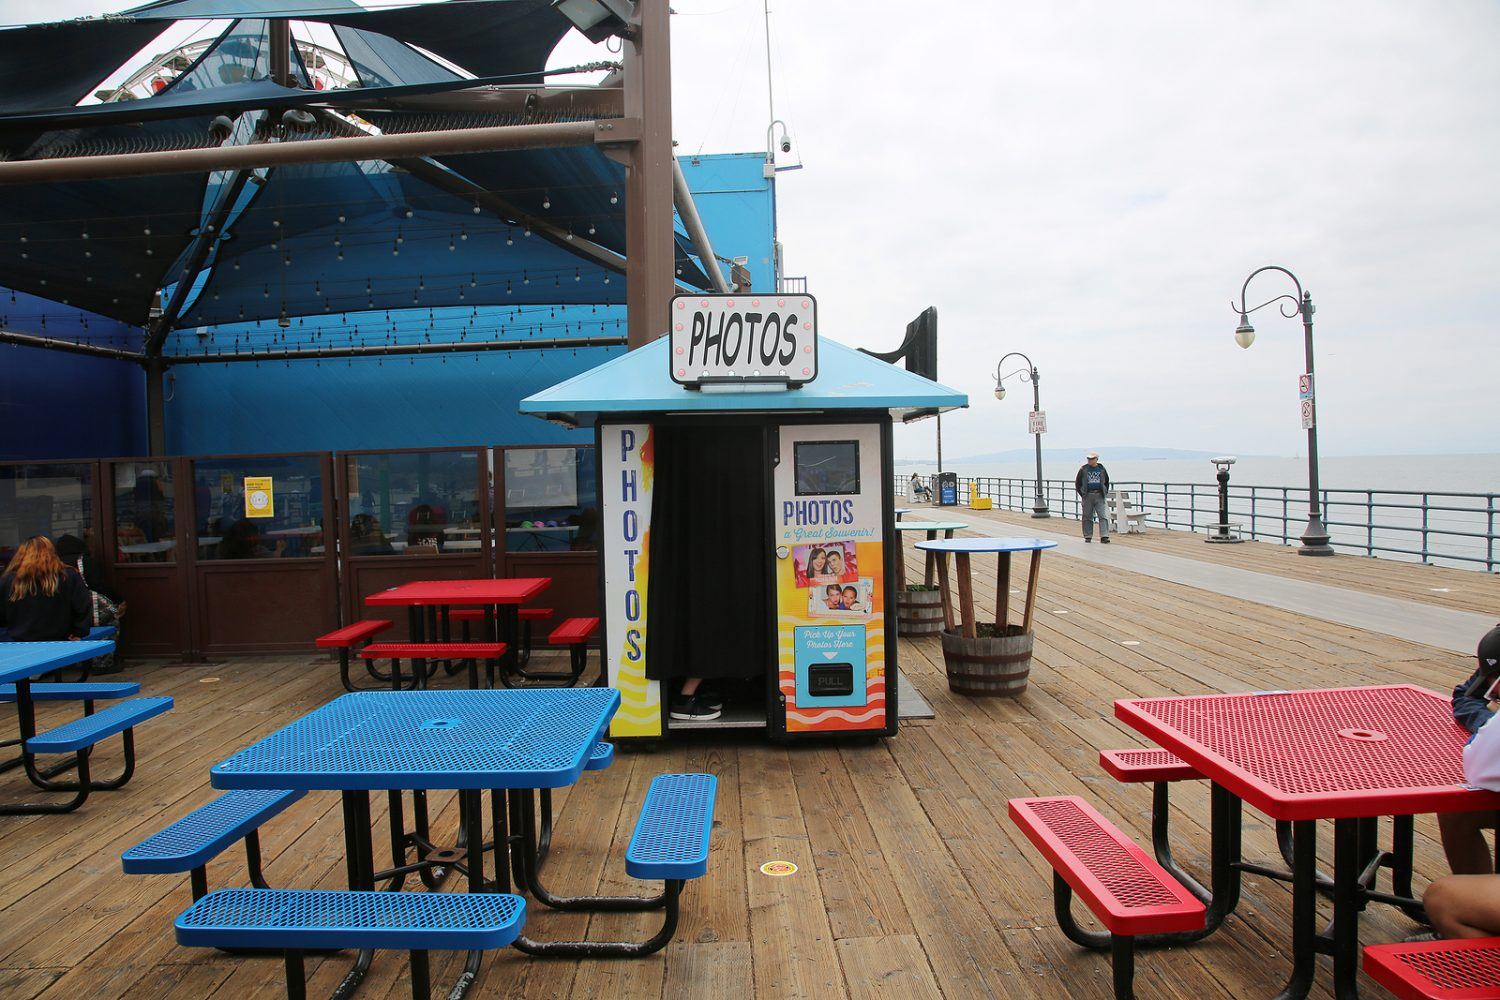 May 14, 2021 Santa Monica California, USA: Photo Booth. A self service Photo Booth on the Santa Monica Pier for all to enjoy. Have your Selfie Pictures Taken in a Photo Booth. Editorial Use.